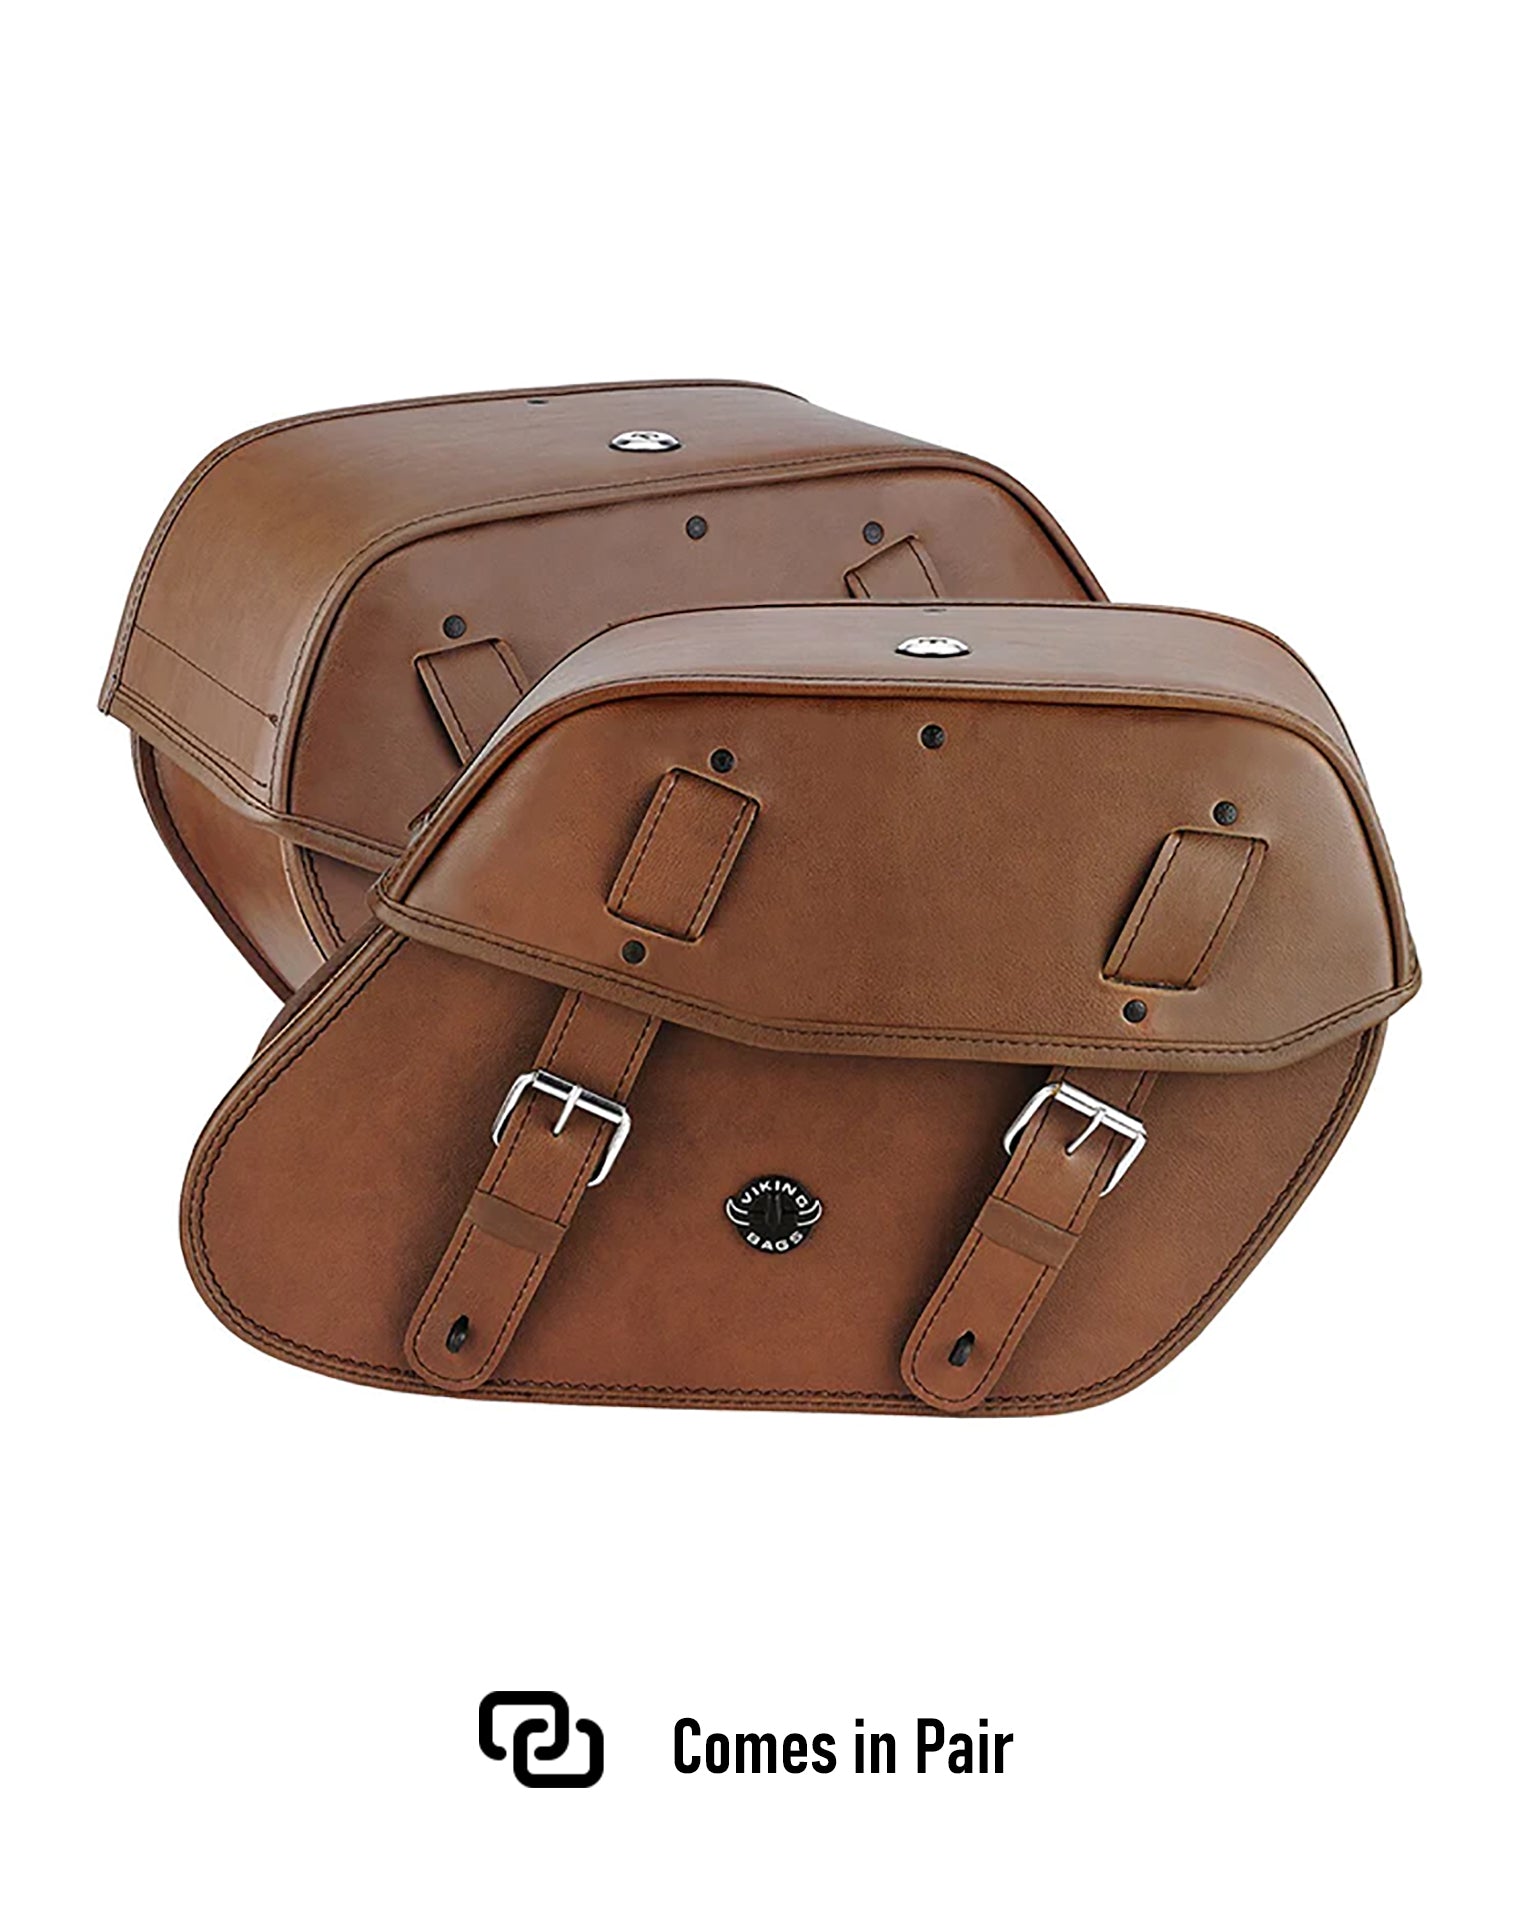 Viking Odin Brown Large Leather Motorcycle Saddlebags For Harley Softail Cross Bones Flstsb Weather Resistant Bags Comes in Pair